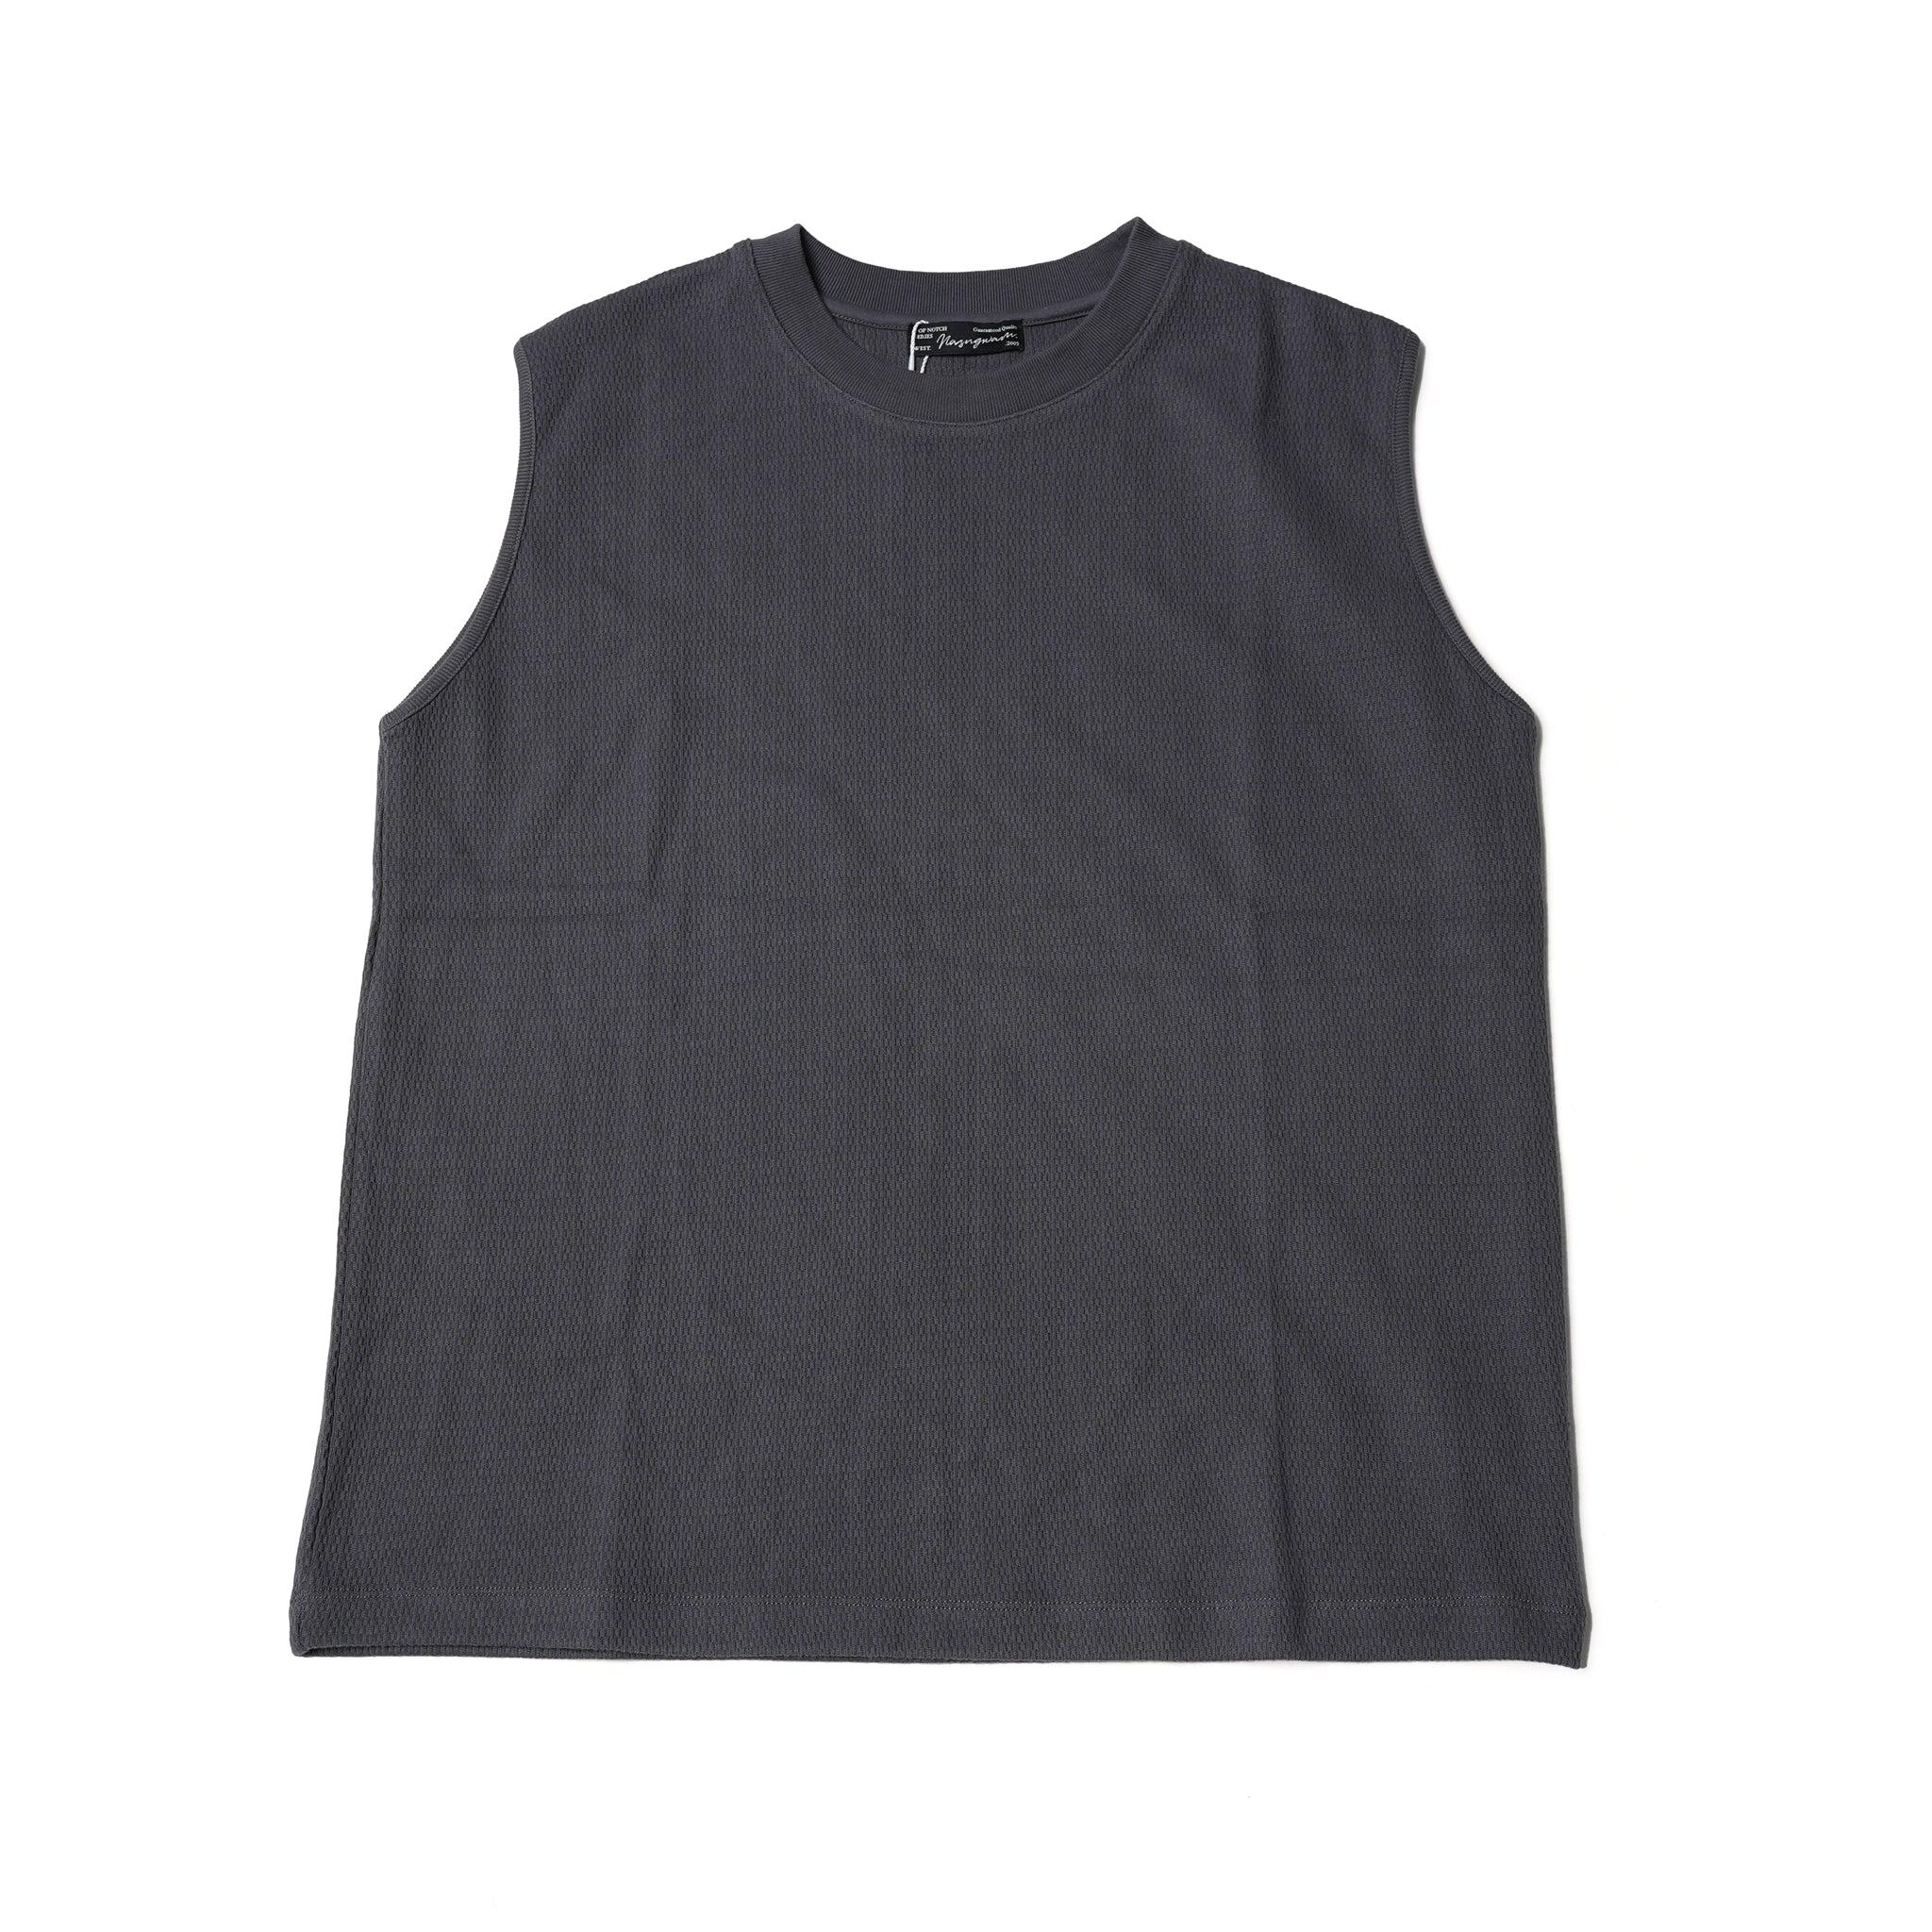 No:C2316908 | Name:ANY TIME 0 SLEEVE | Color:01-Natural/02-Charcoal【NASNGWAM_ナスングワム】【ネコポス選択可能】